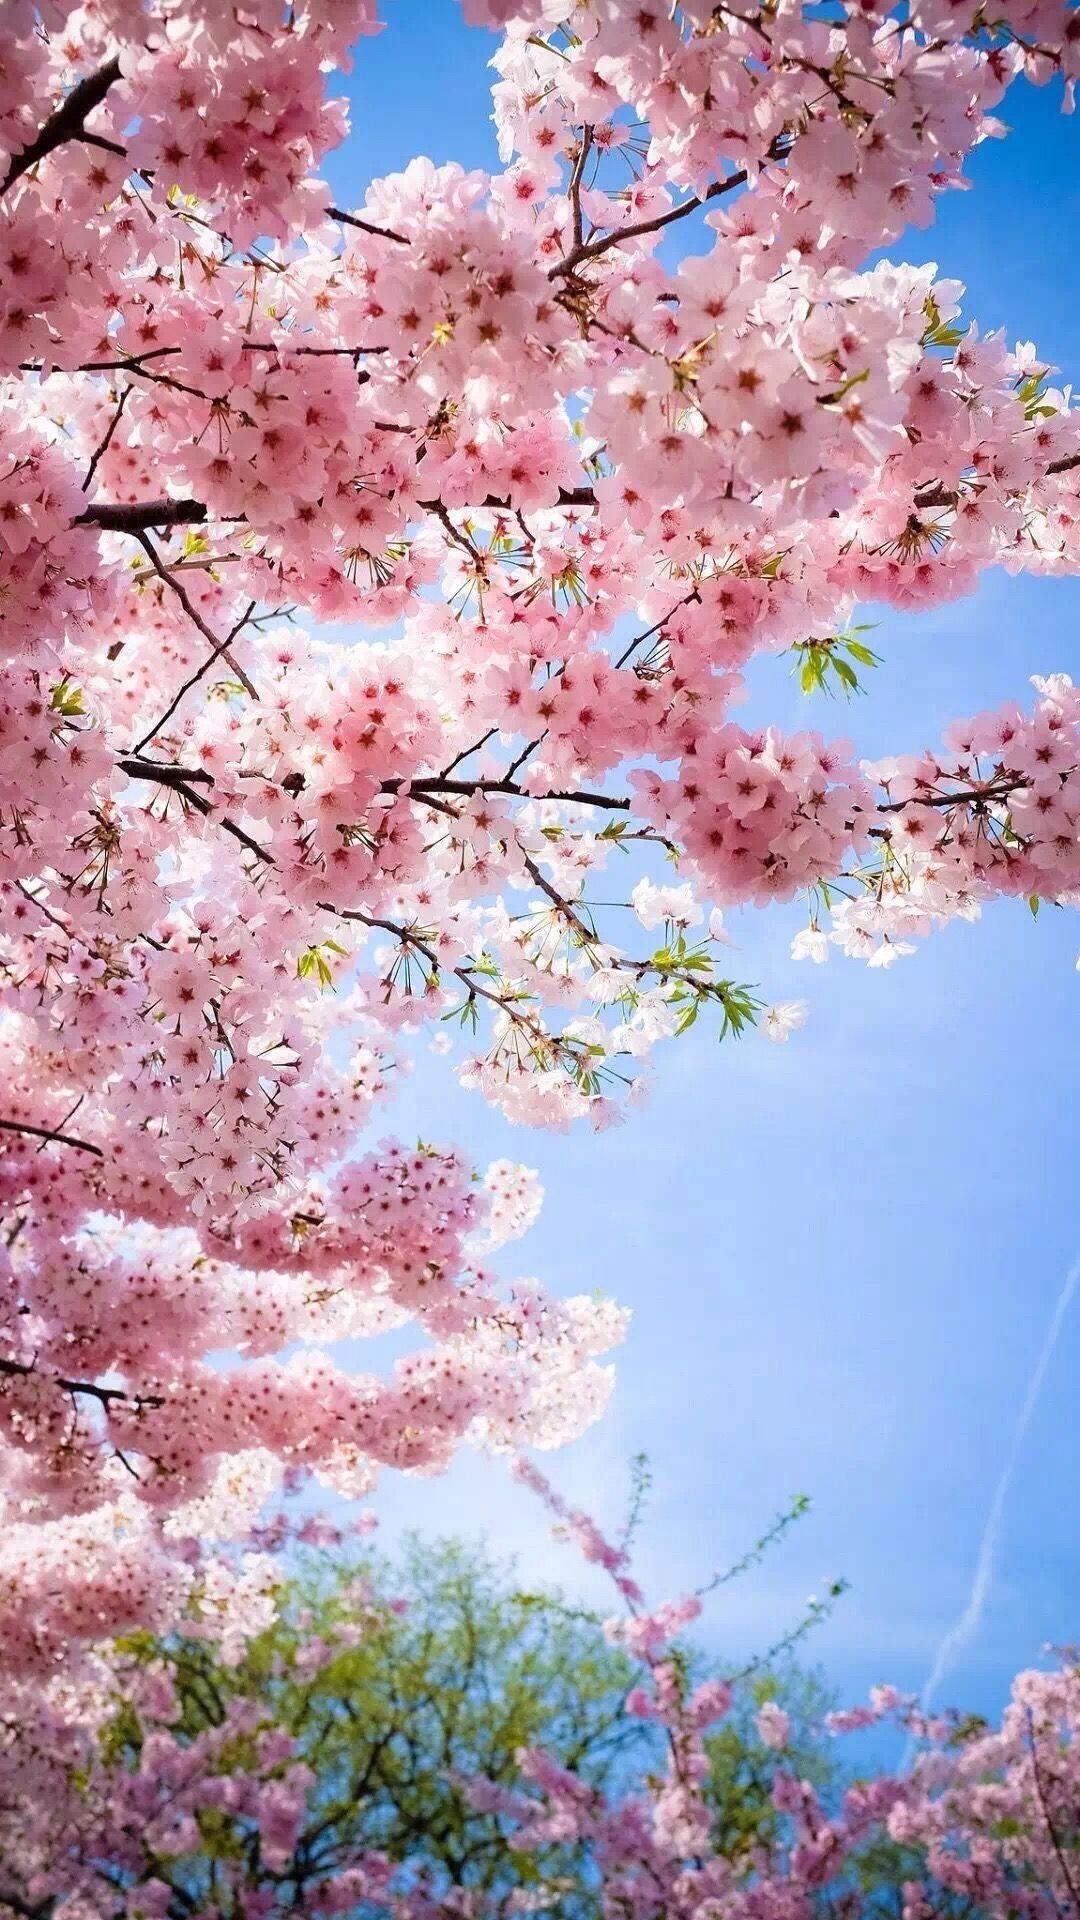 One of my favorite flowers. Gathering wild pink cherry blossoms